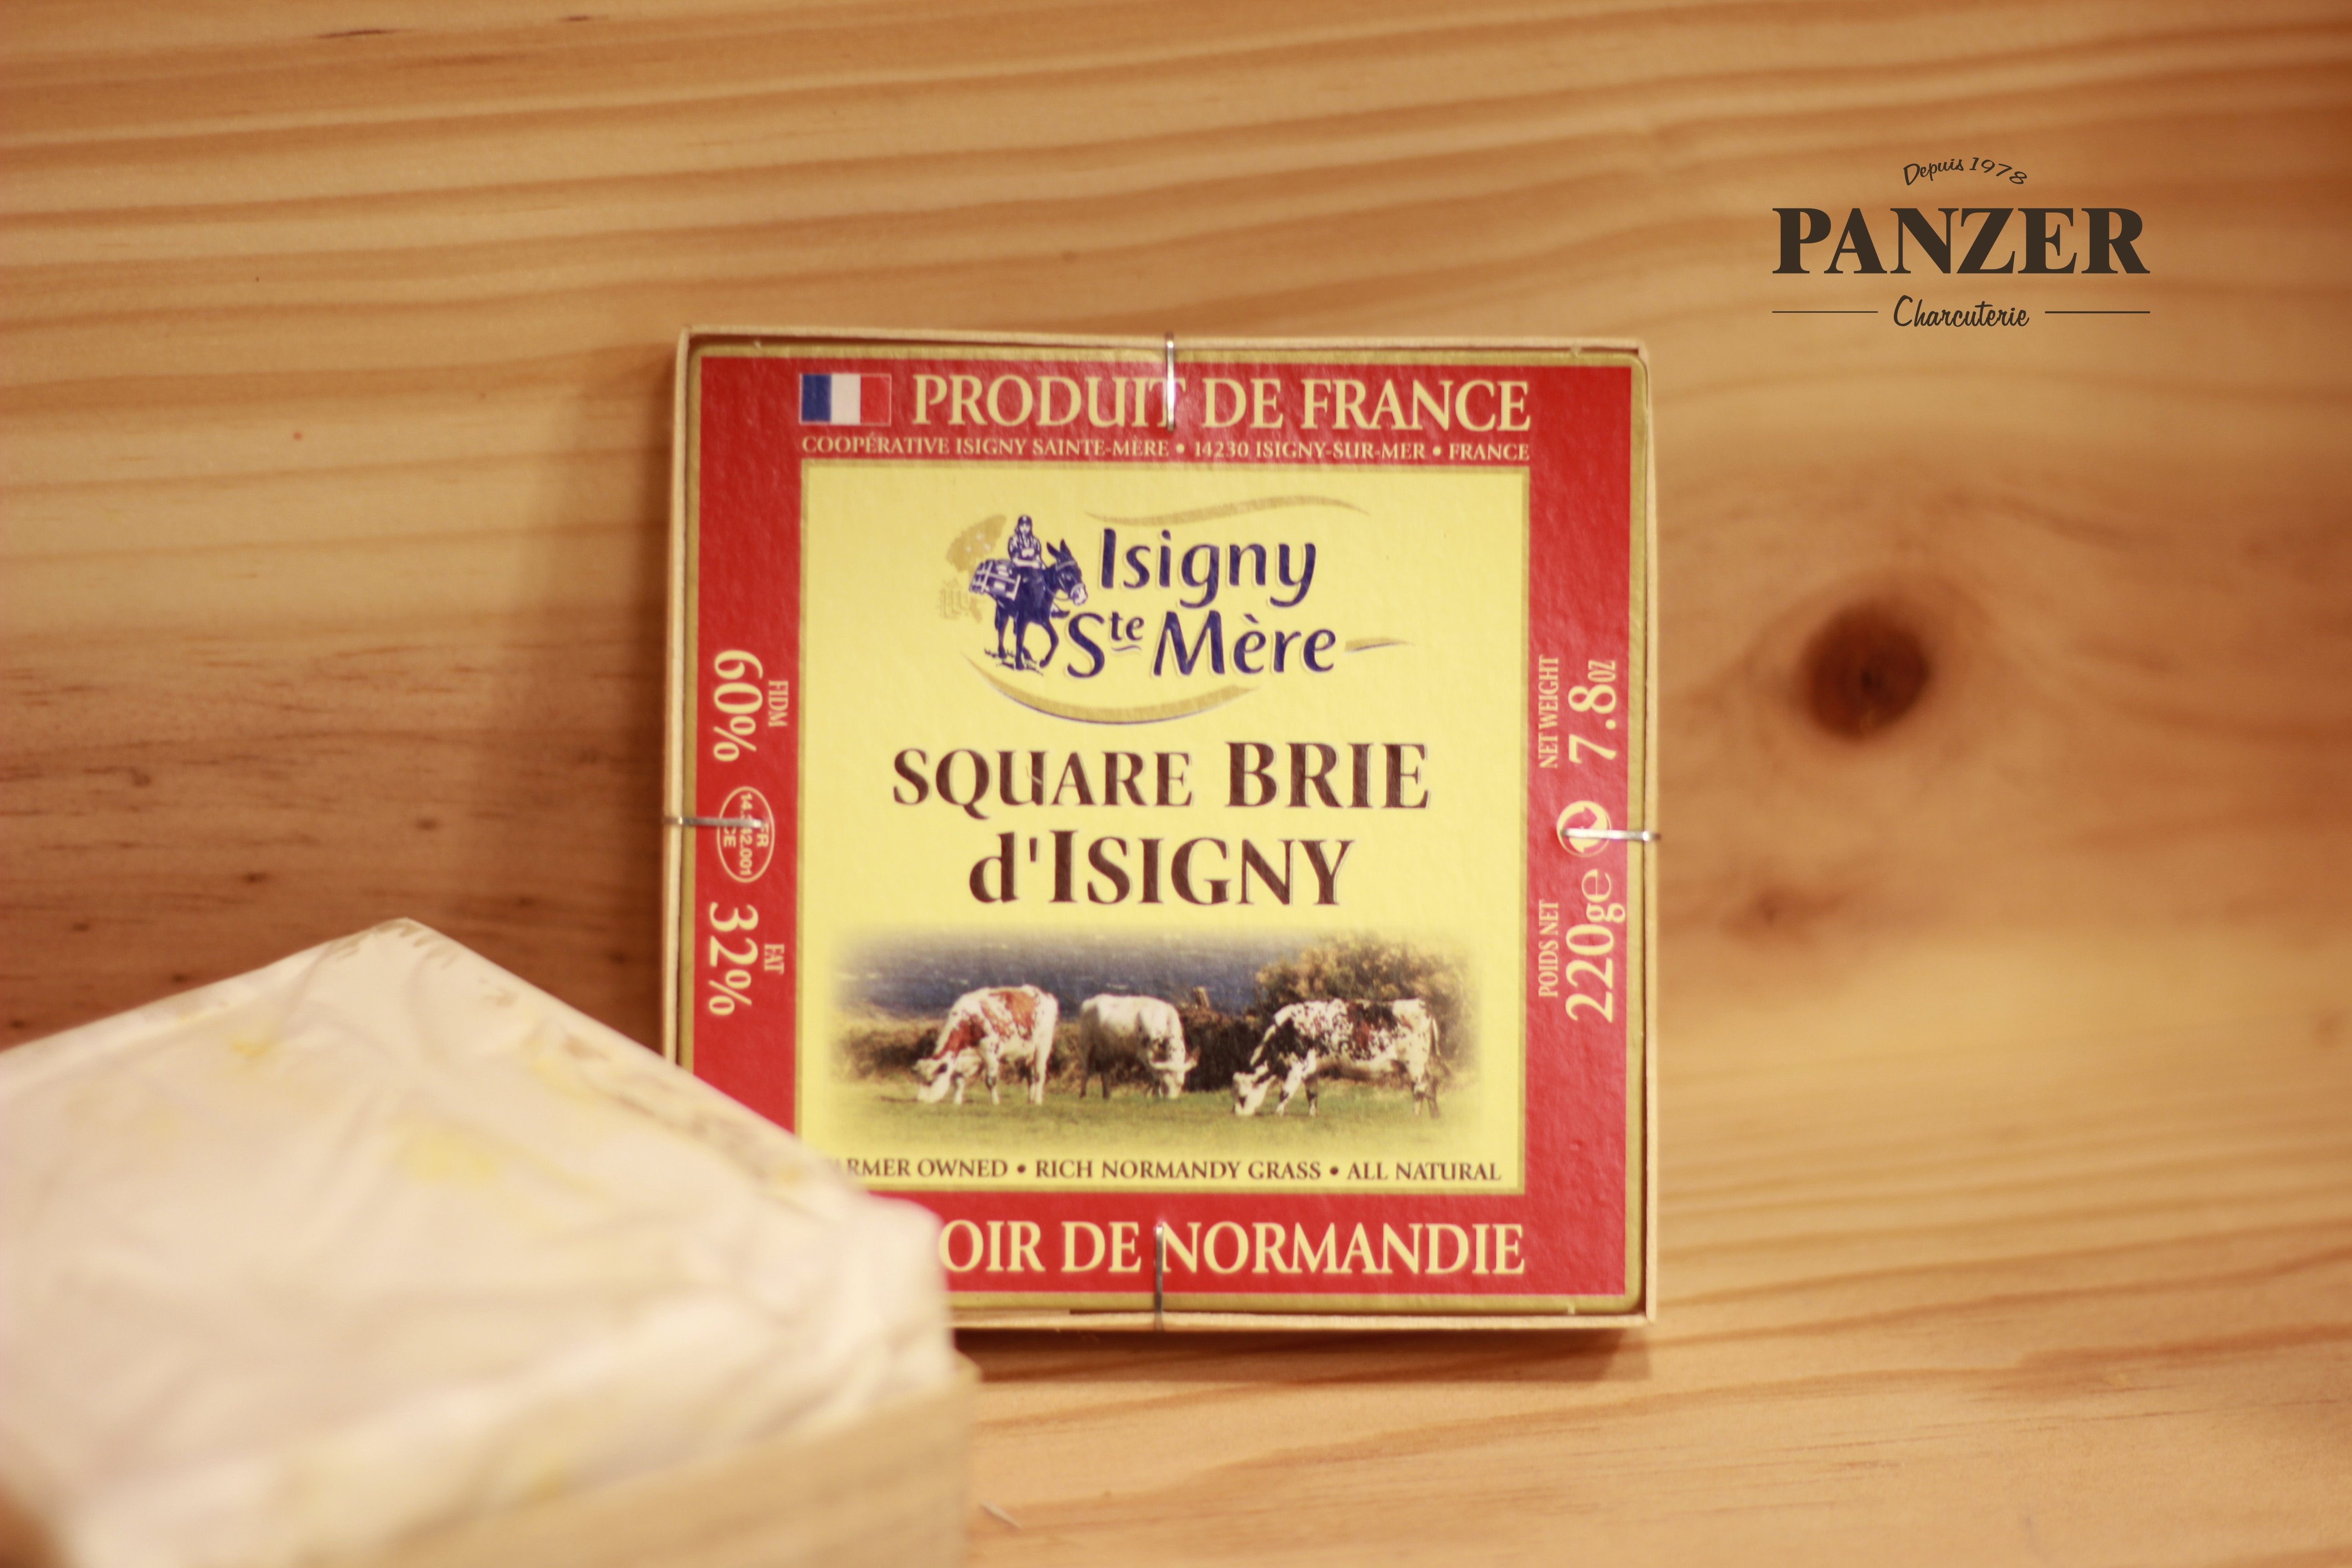 Brie Isigny Ste Mere Panzer Charcuterie 